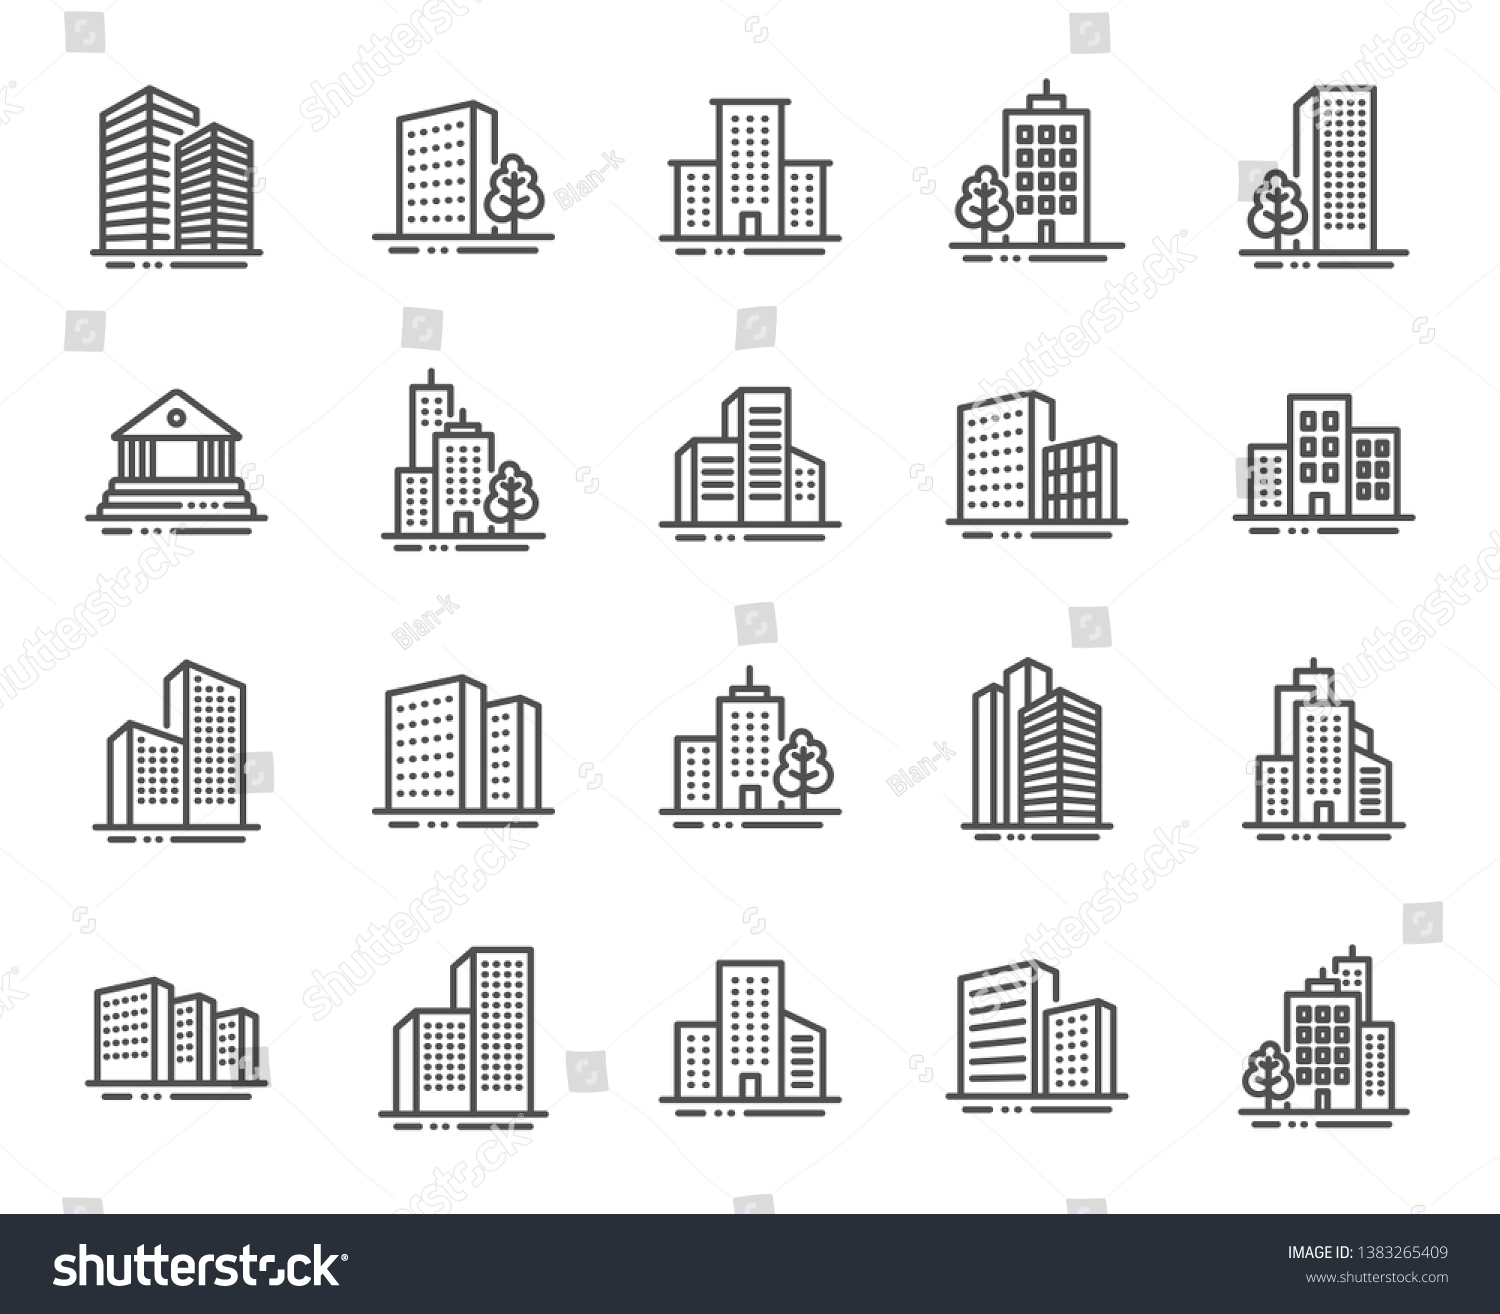 Buildings line icons. Bank, Hotel, Courthouse. City, Real estate, Architecture buildings icons. Hospital, town house, museum. Urban architecture, city skyscraper, downtown. Vector #1383265409